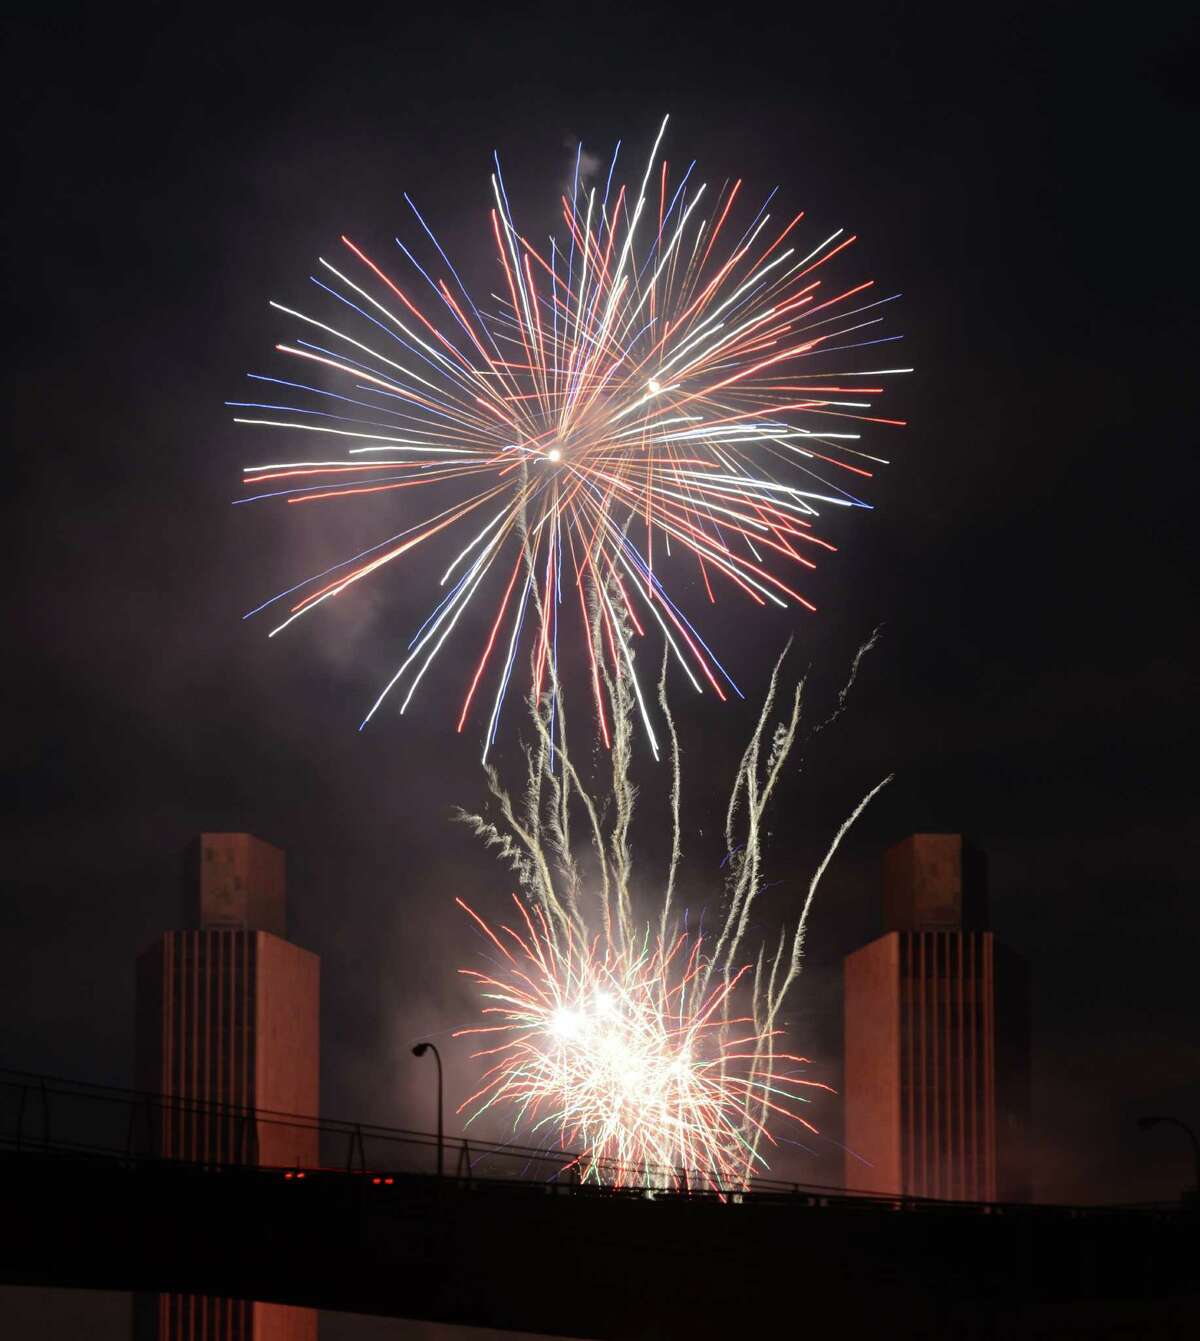 Fireworks fill the sky over Albany during New York States Fourth of July Celebration presented by Price Chopper & Market 32 at the Empire State Plaza on Monday night, July 4, 2016, viewed from Rensselaer, N.Y. (Will Waldron/Times Union)